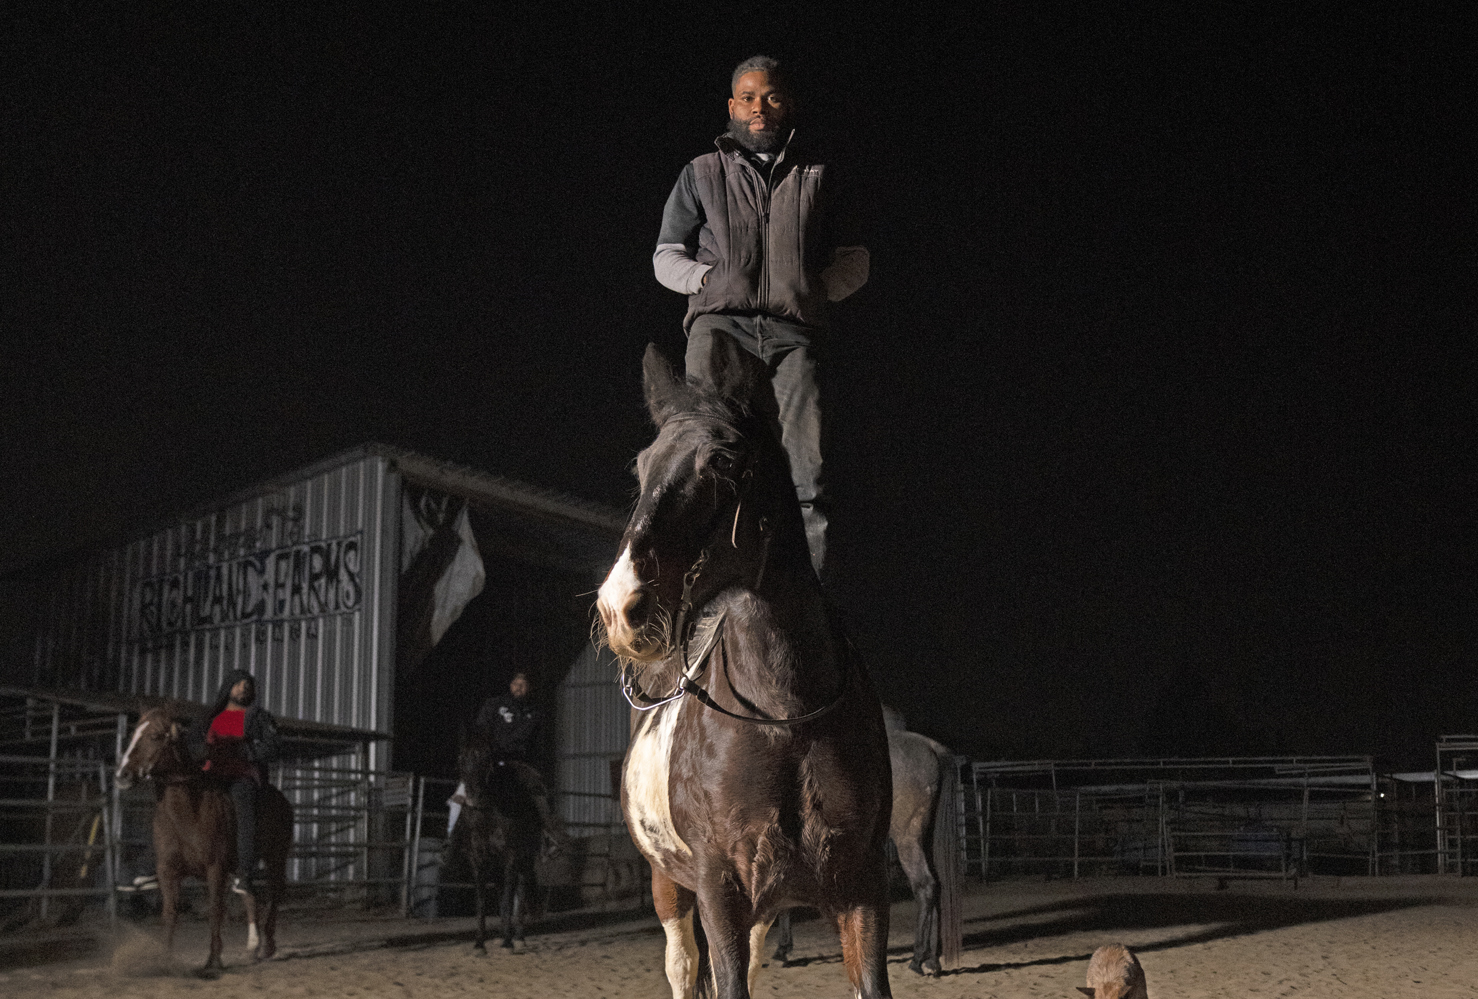 Compton Cowboys man standing on horse at night